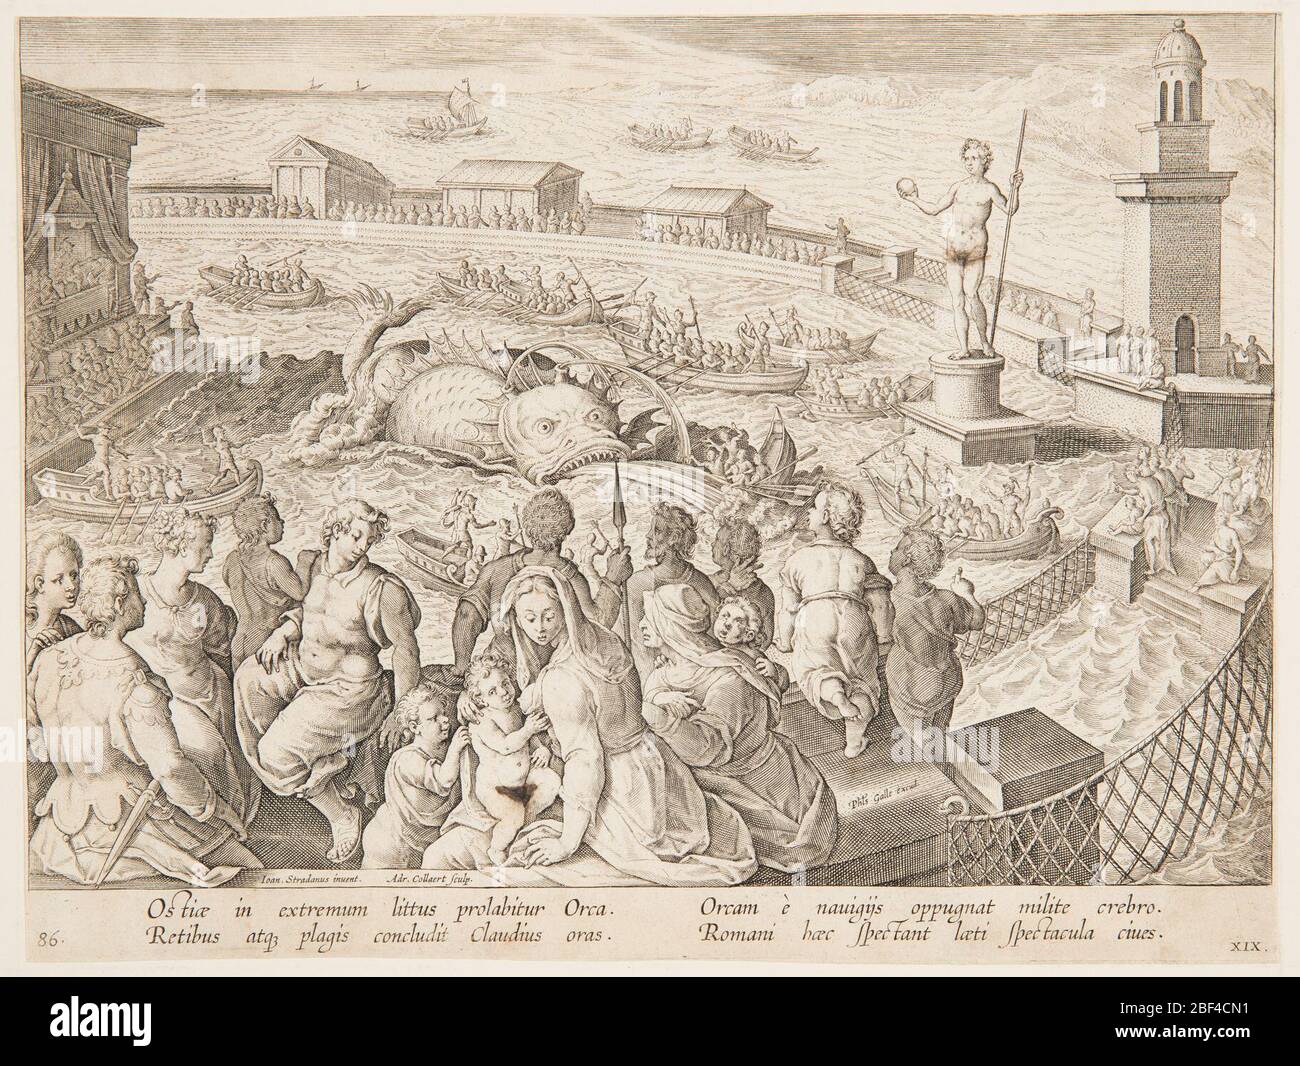 Whale Hunt by the Emperor Claudius in the harbour at Ostia pl 19 in the Venationes Ferarum Avium Piscium series. Figural seascape scene, with groups in the foreground observing an orca sea monster trapped within a walled area. A statue and a tower at right. Open boats filled with men surround the monster, while spectators watch from the wall. Stock Photo